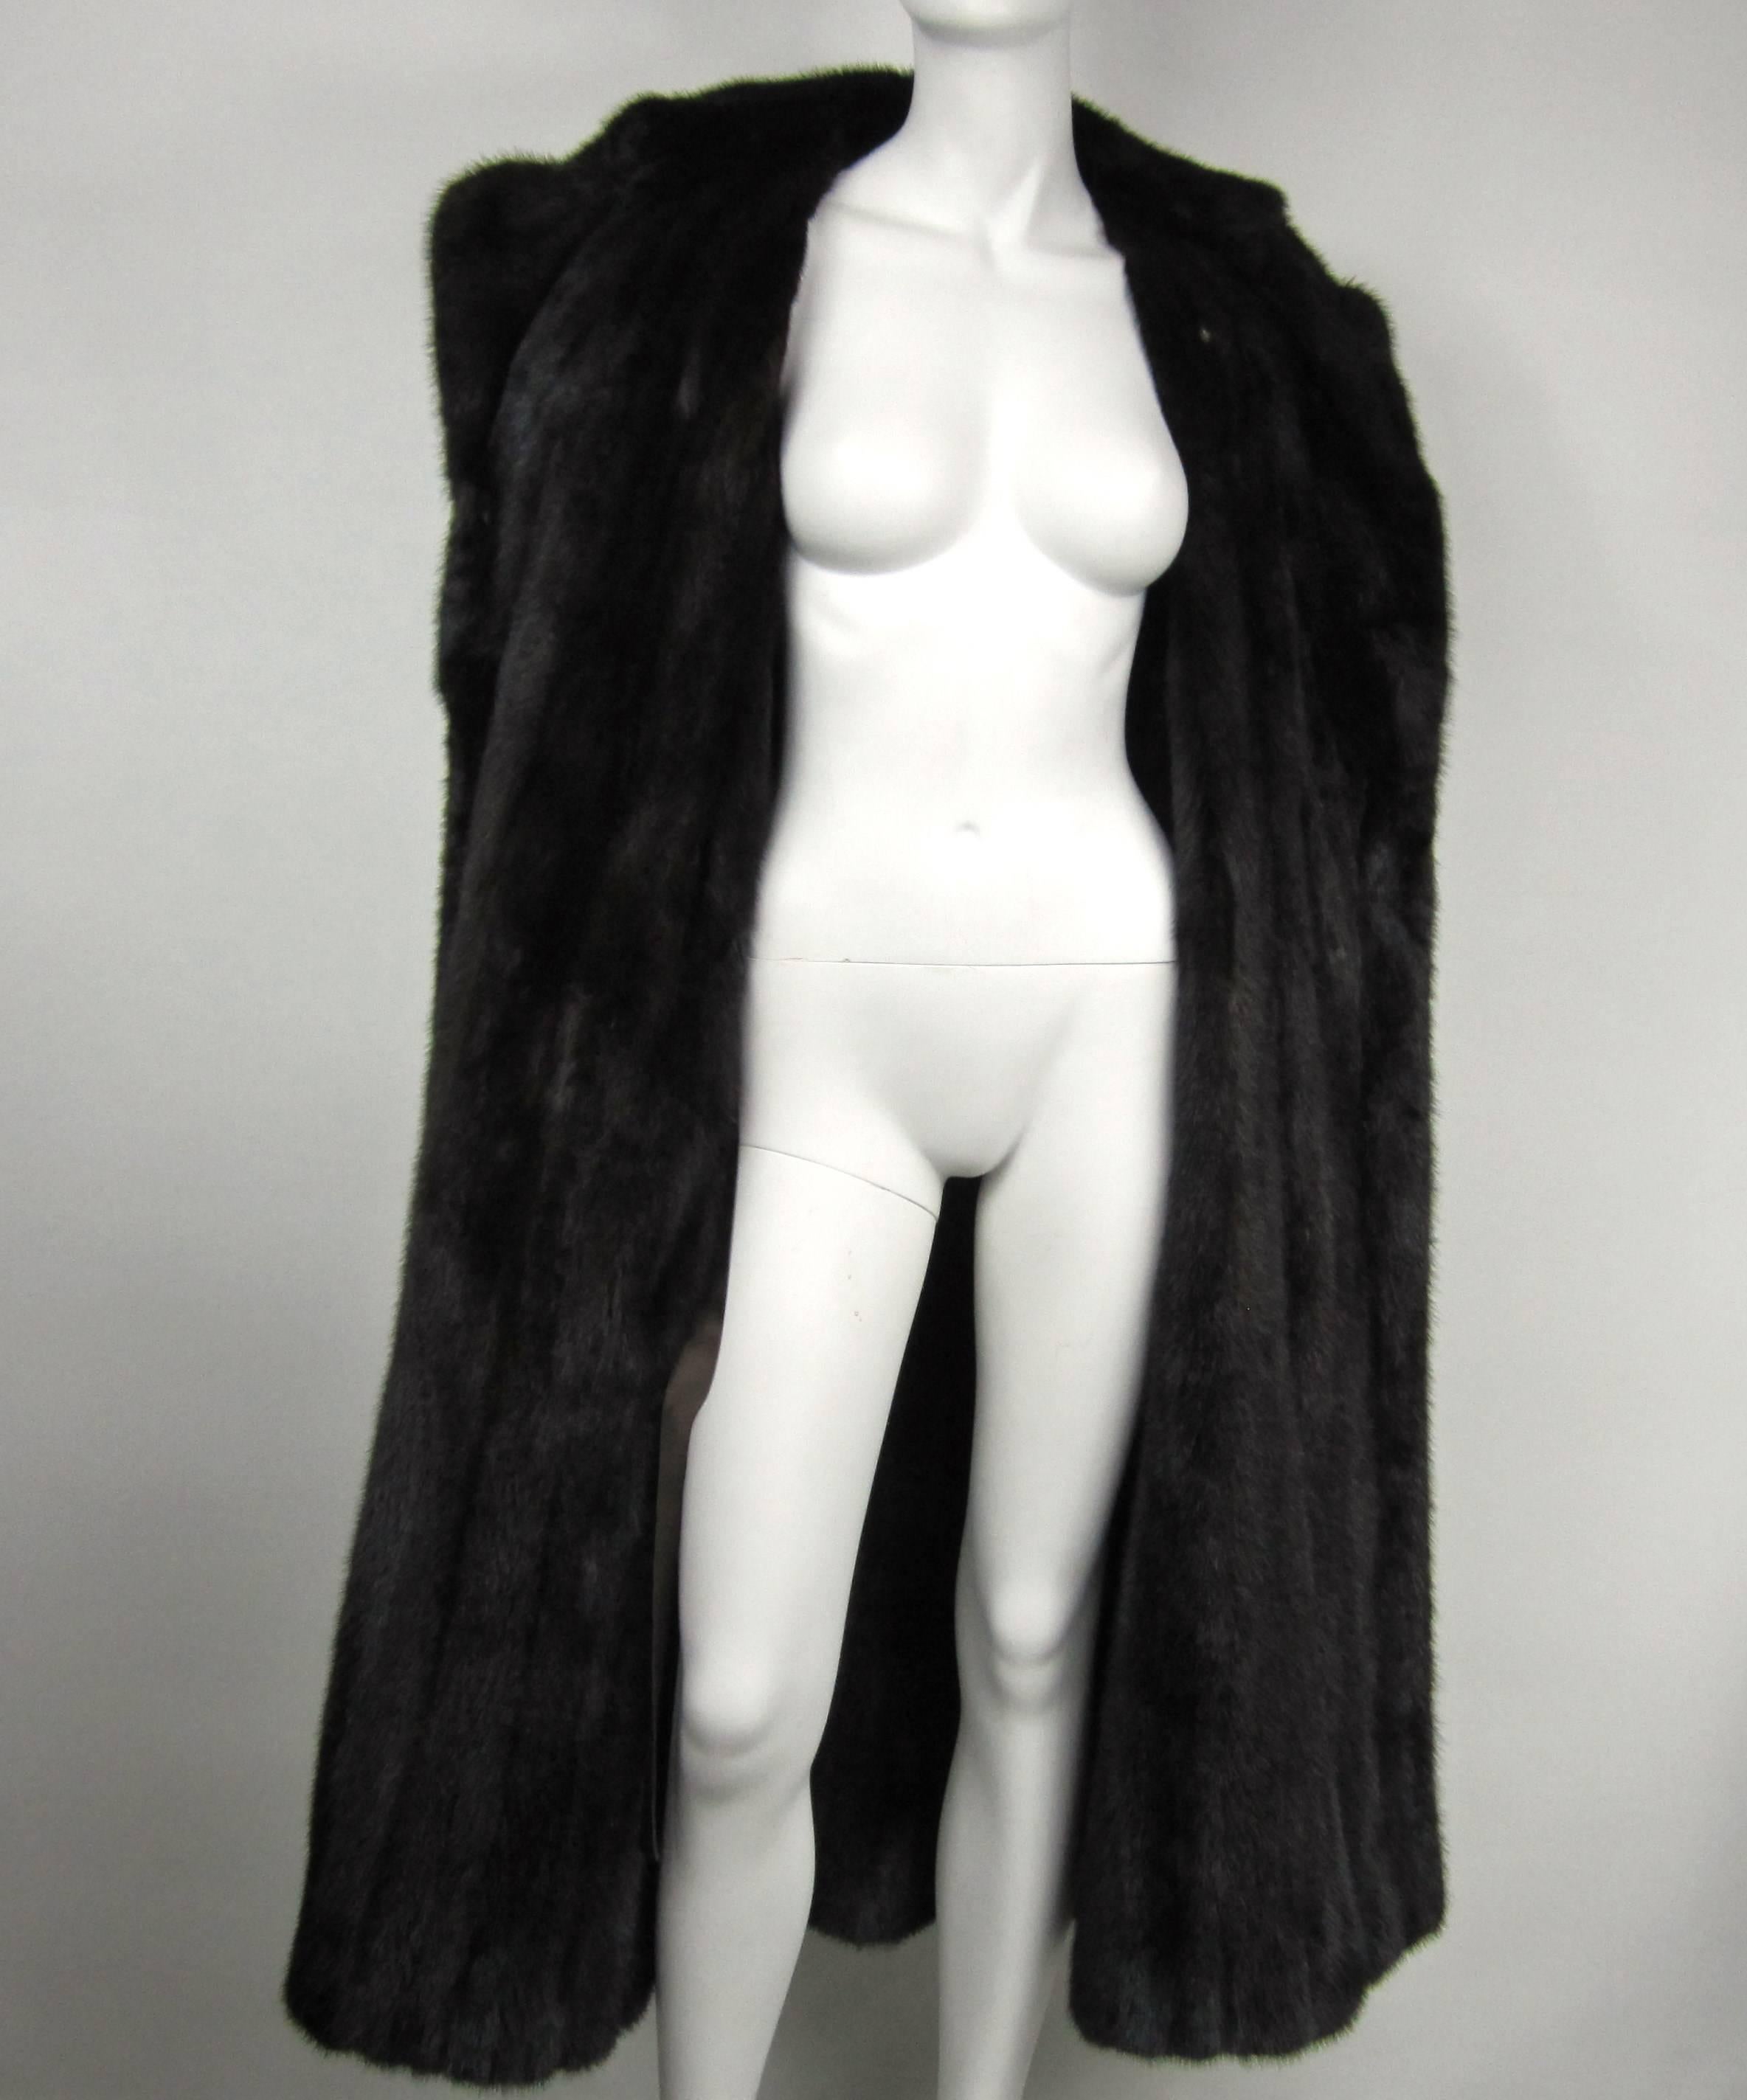 Lined inside with a dark brown mink with shoulder epaulets and Button pockets, kick pleat, 3 buttons down the front. Measuring Up to 42 in chest, Up to 40 in waist, Up to 50 in hips, 7.5 in collar, 50 inches length, 68 inch Sweep 
This will fit a